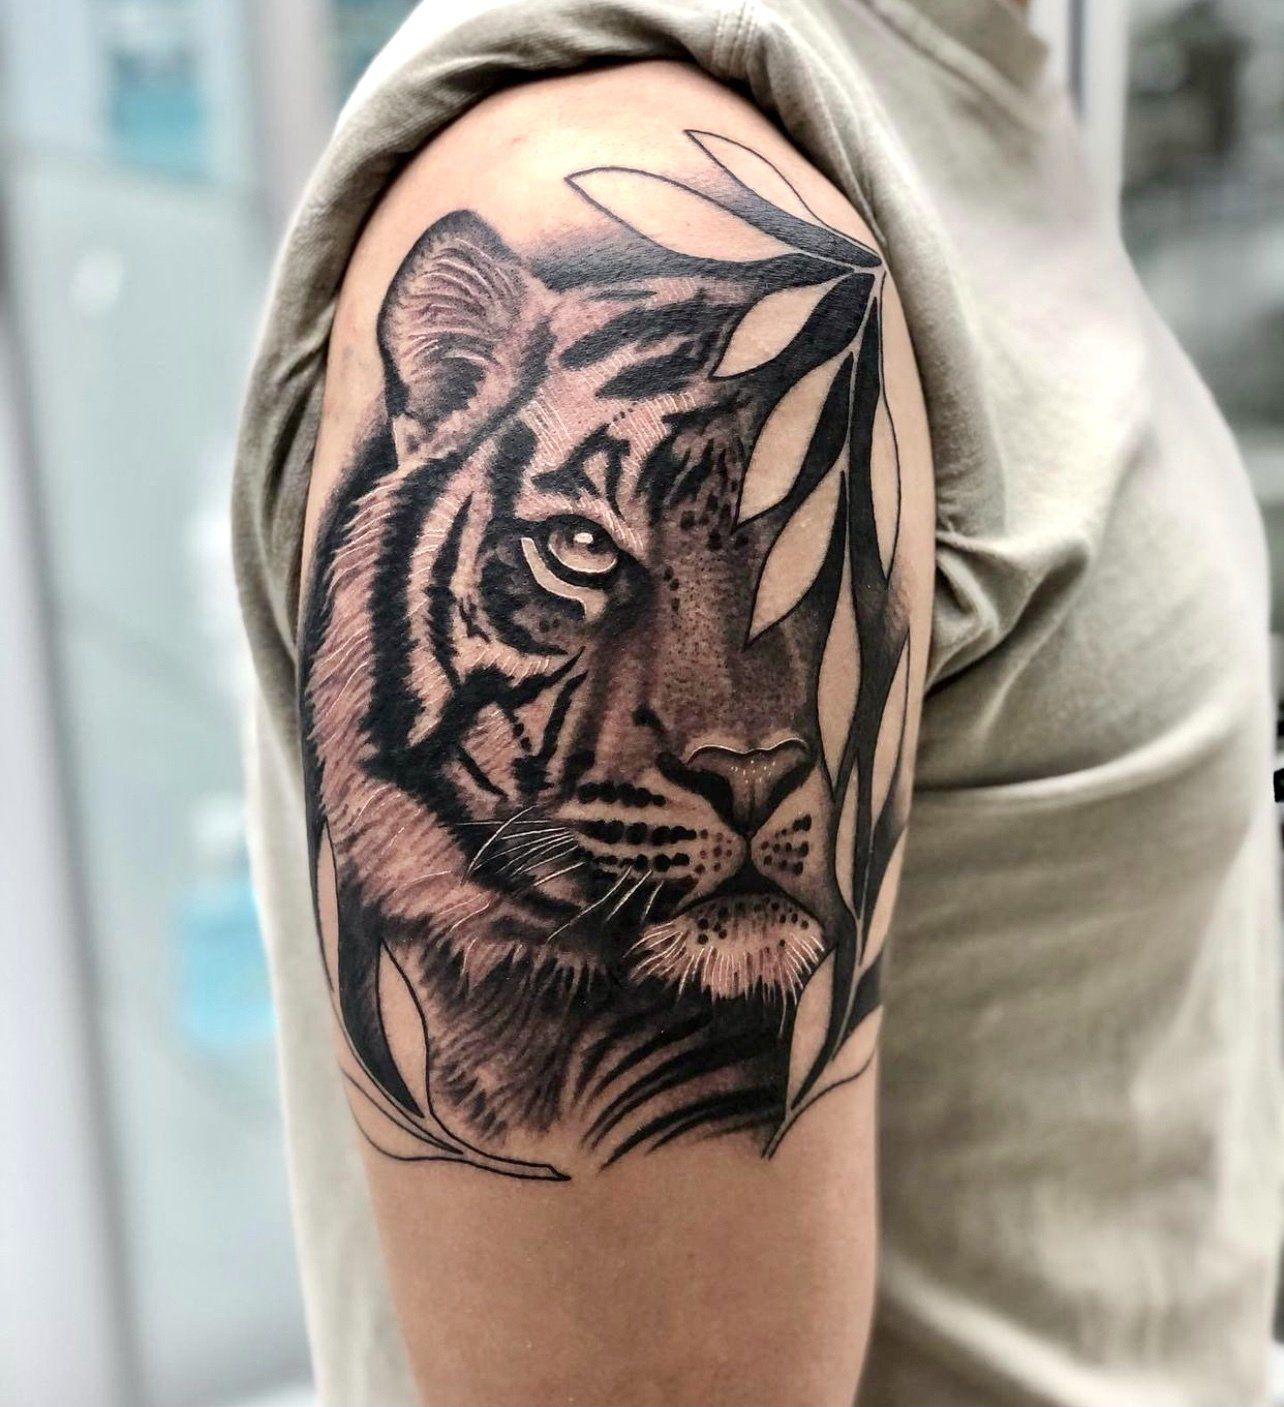 a man has a tattoo of a tiger on his arm